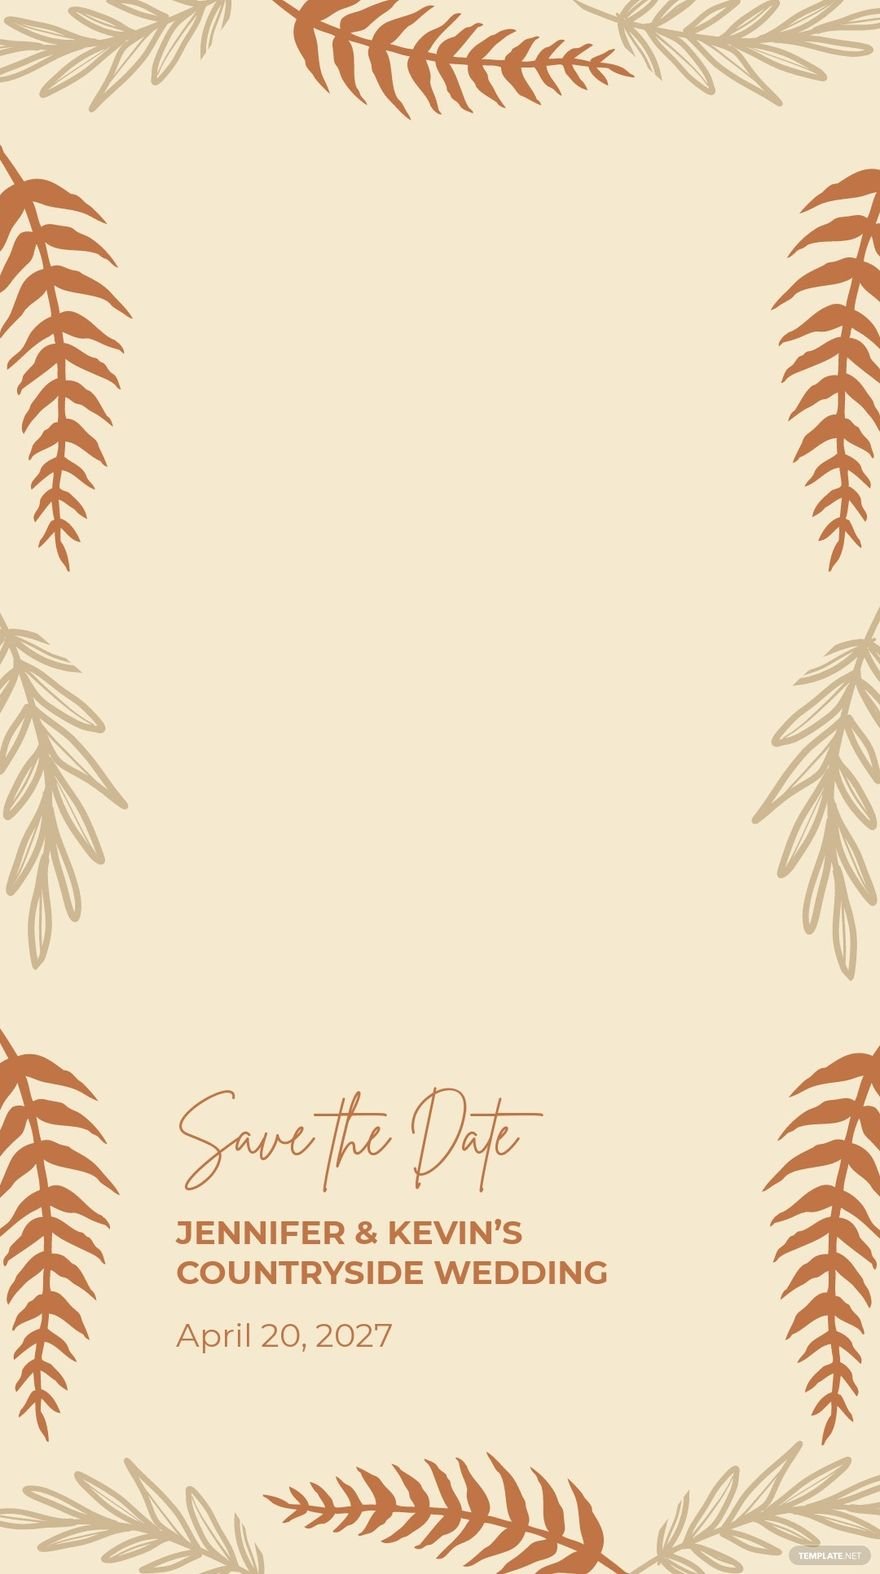 Rustic Save The Date Snapchat Geofilter Template